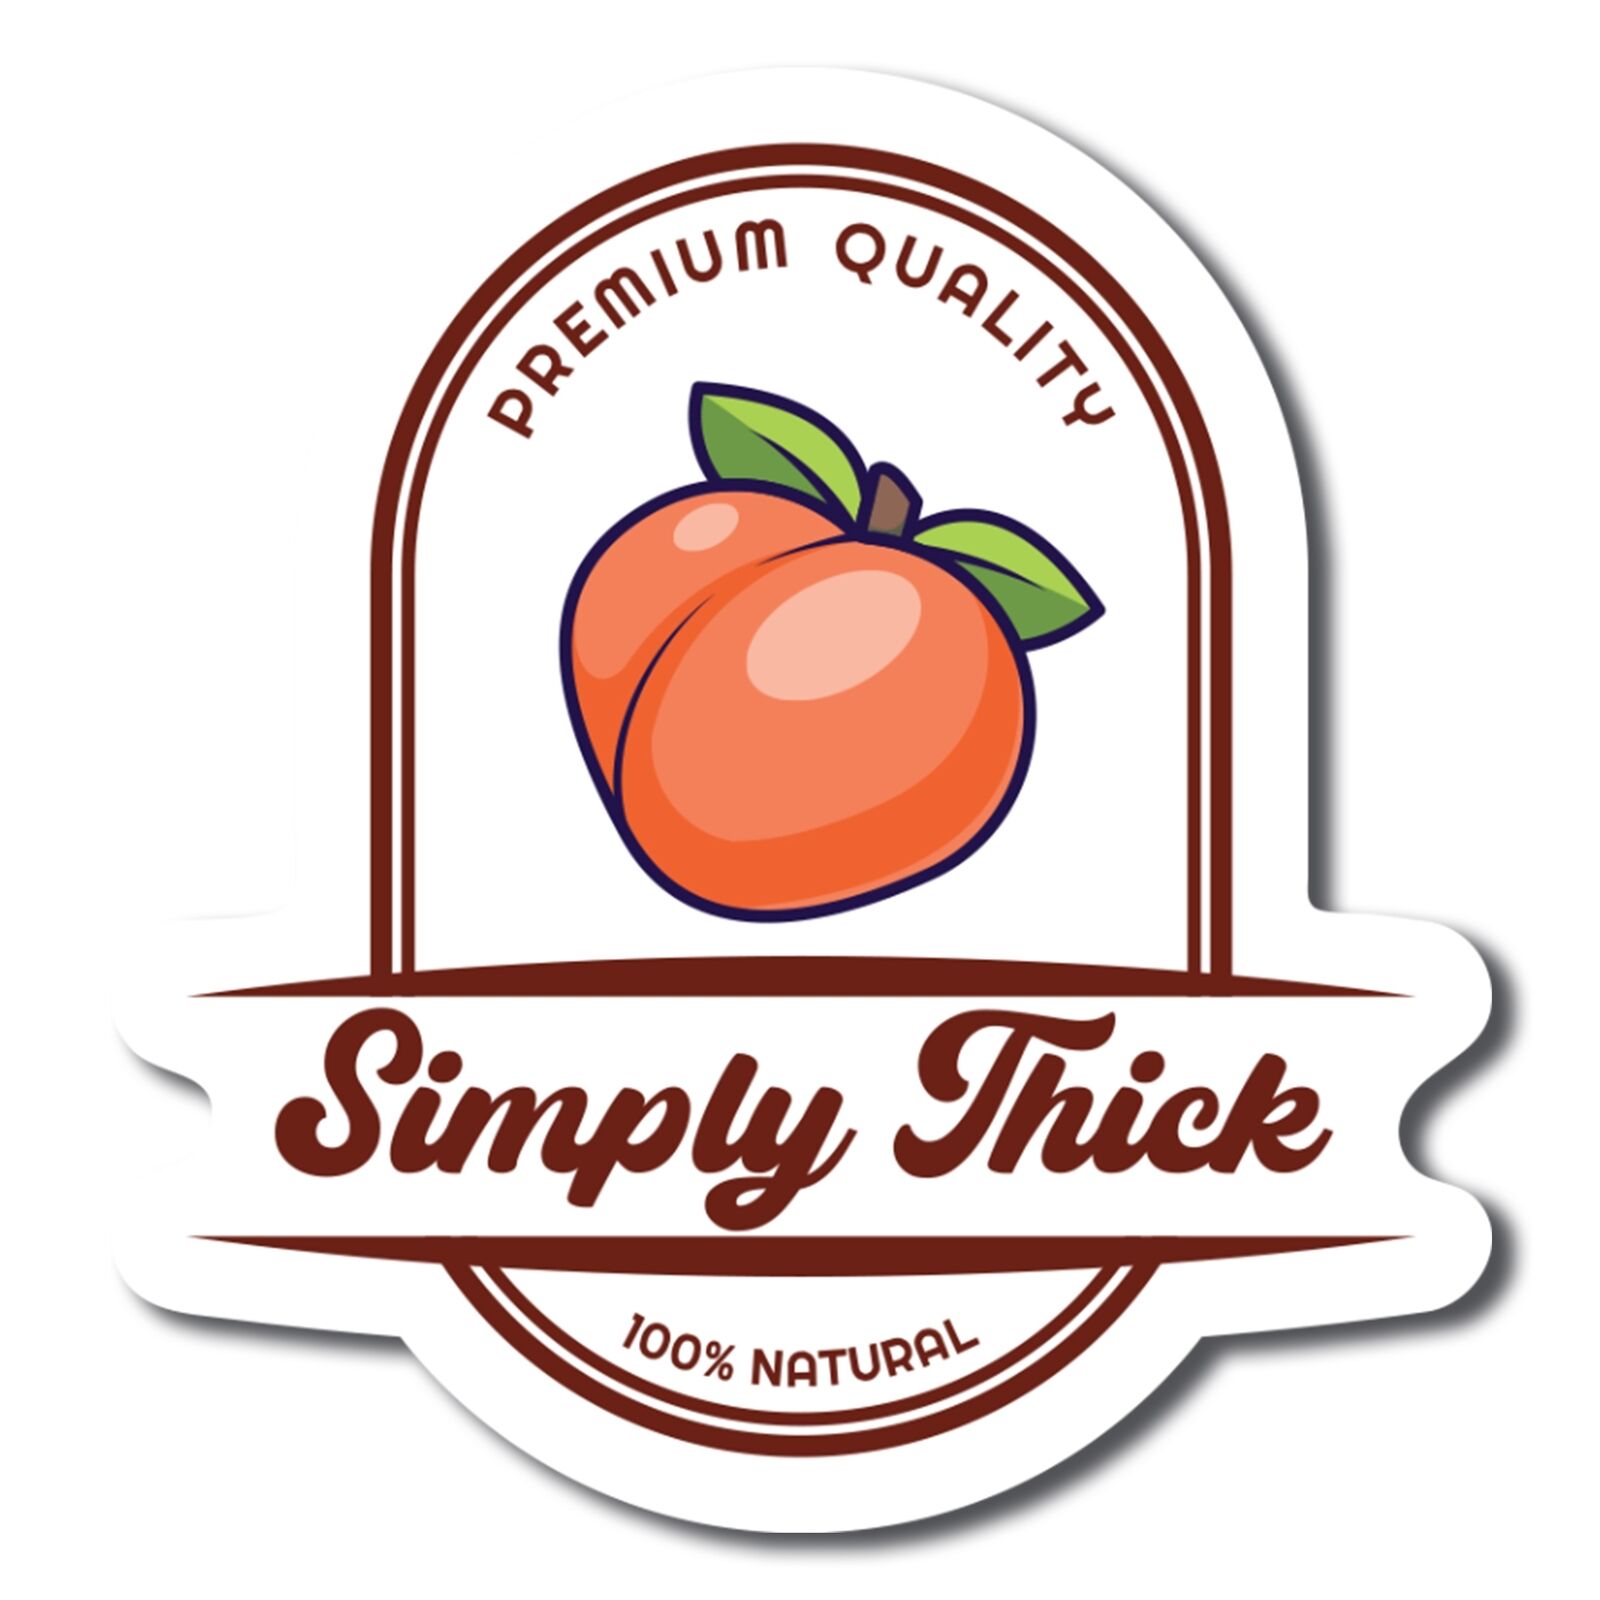 Magnet Me Up Premium Quality Simply Thick Peach Magnet Decal, 5x4.5 inch